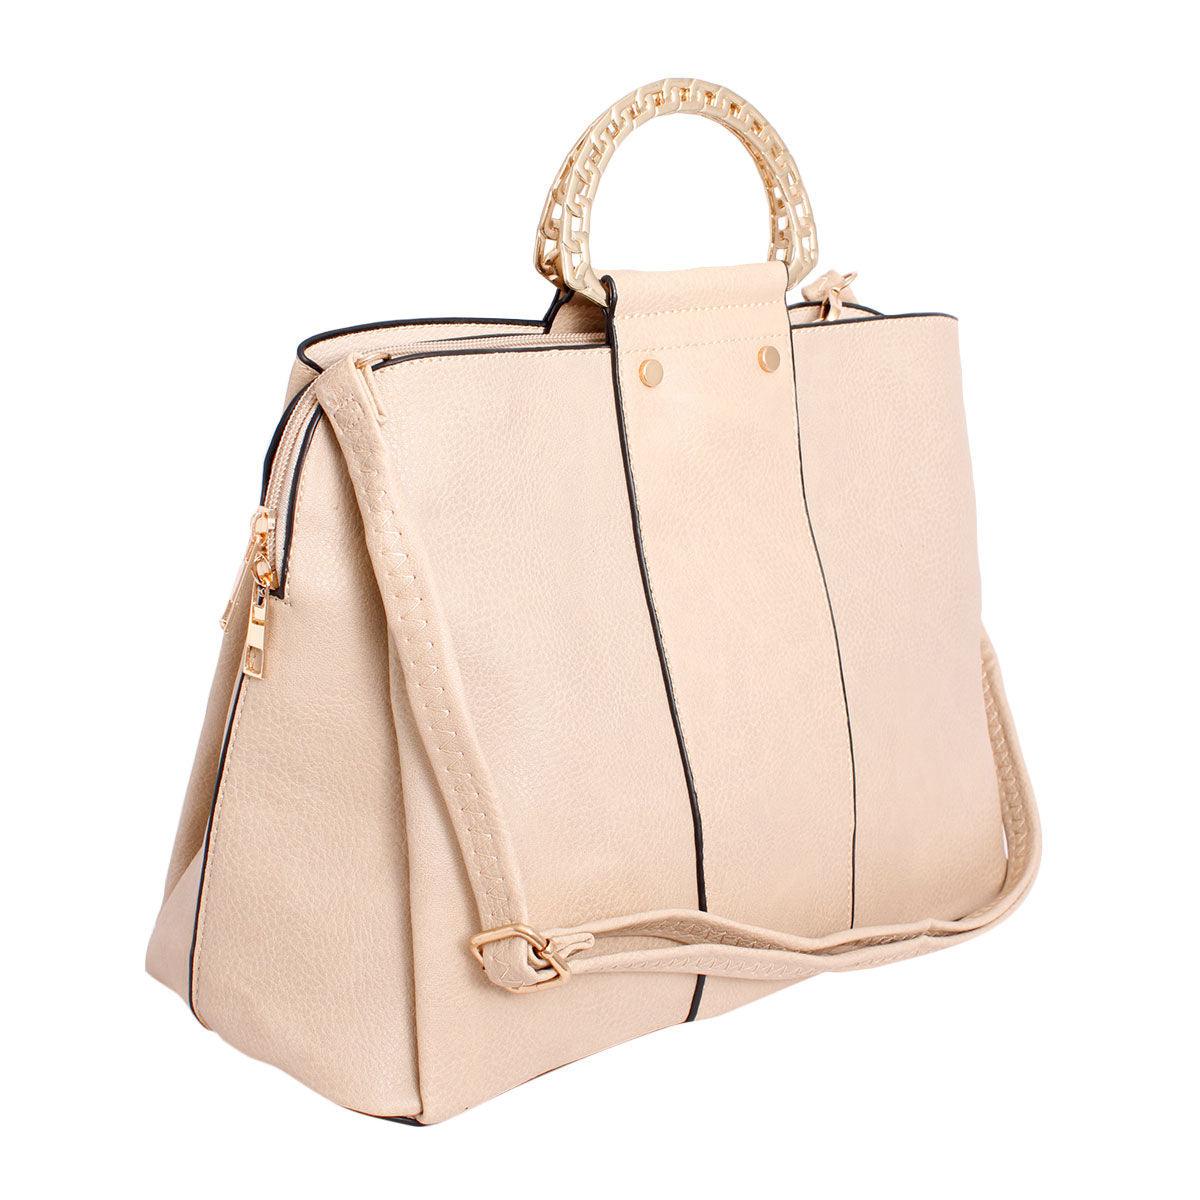 Luxe Ivory Rigid Top Handle Handbag: Sophisticated Style for Women